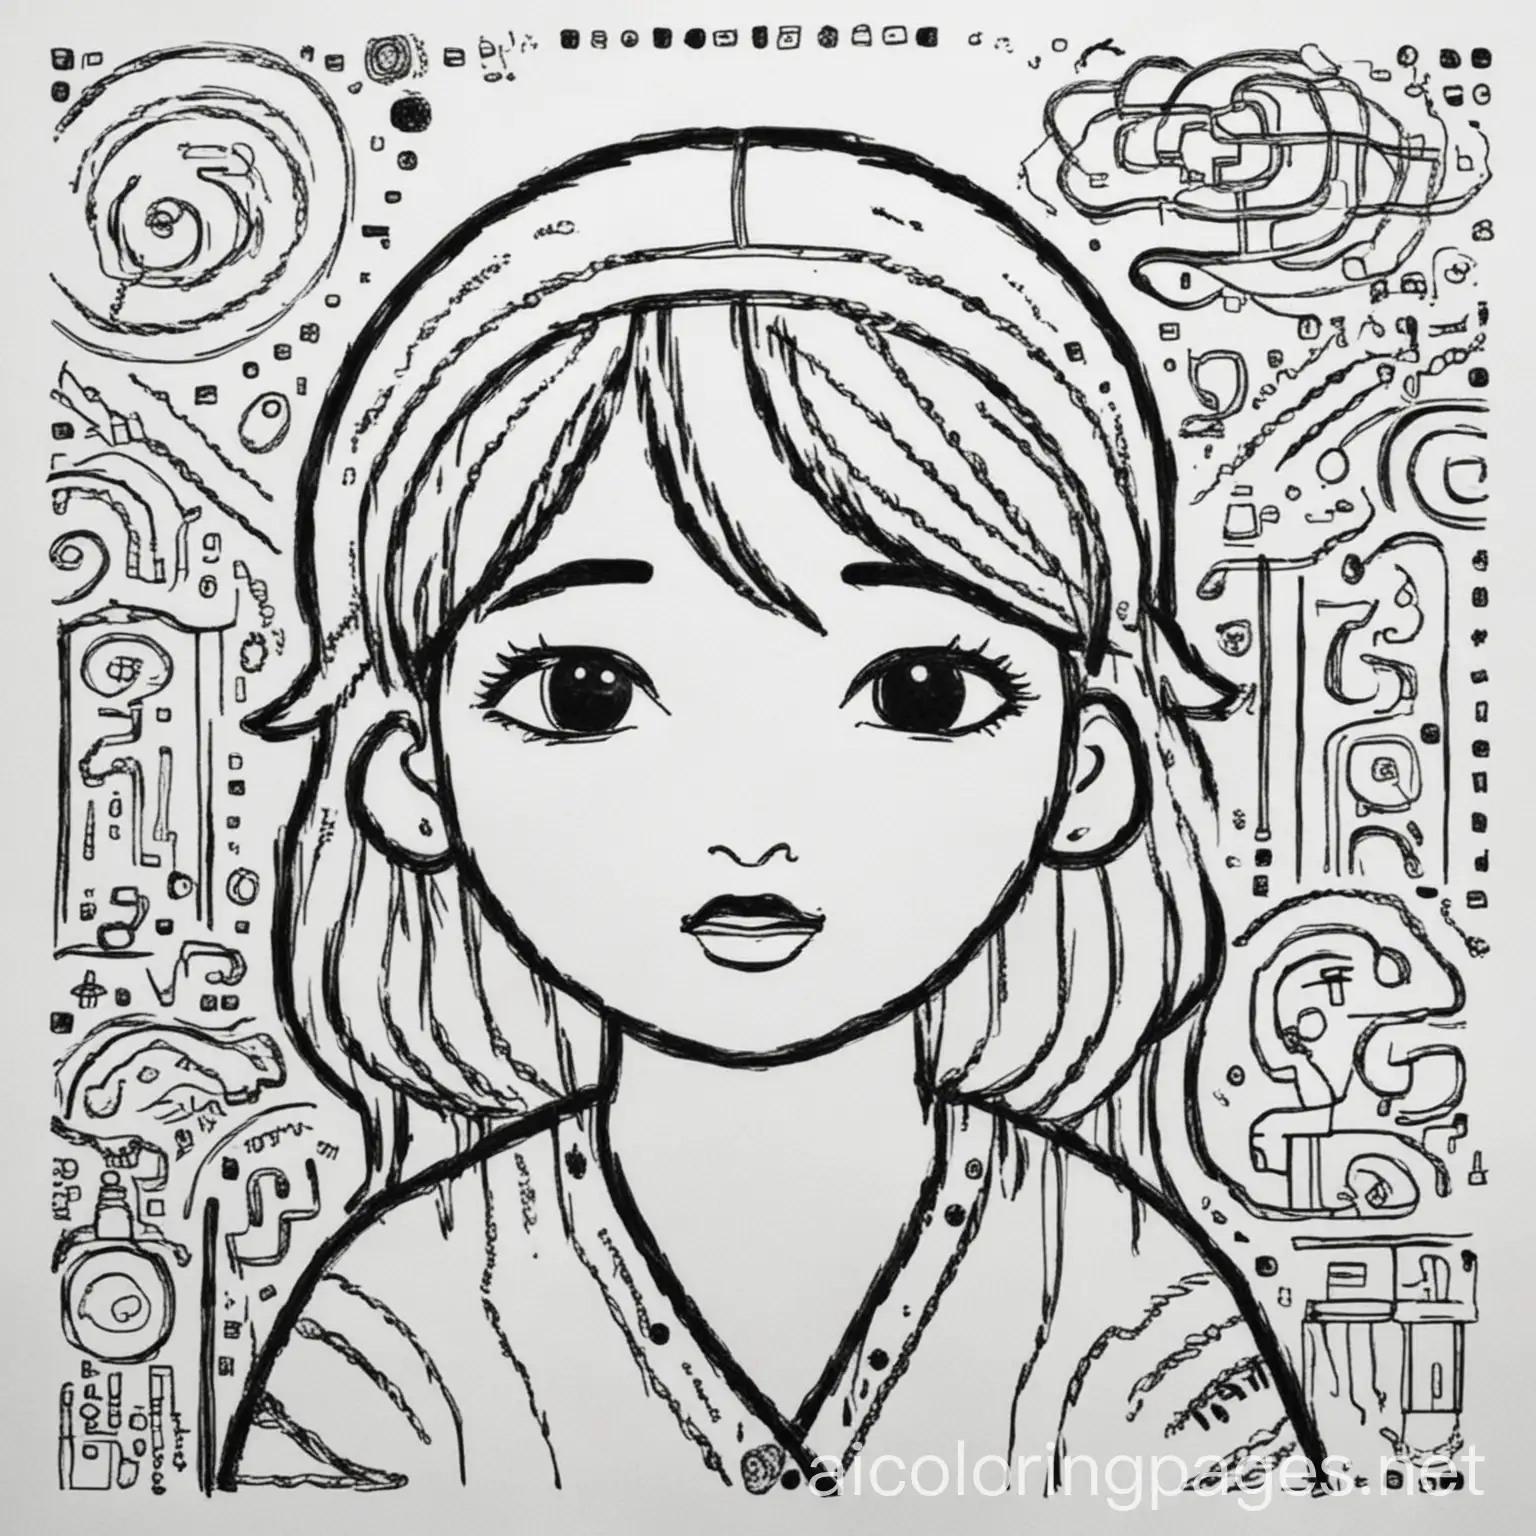  Show human culture in a black and white coloring page, Coloring Page, black and white, line art, white background, Simplicity, Ample White Space. The background of the coloring page is plain white to make it easy for young children to color within the lines. The outlines of all the subjects are easy to distinguish, making it simple for kids to color without too much difficulty. (No translation required as input is in English)